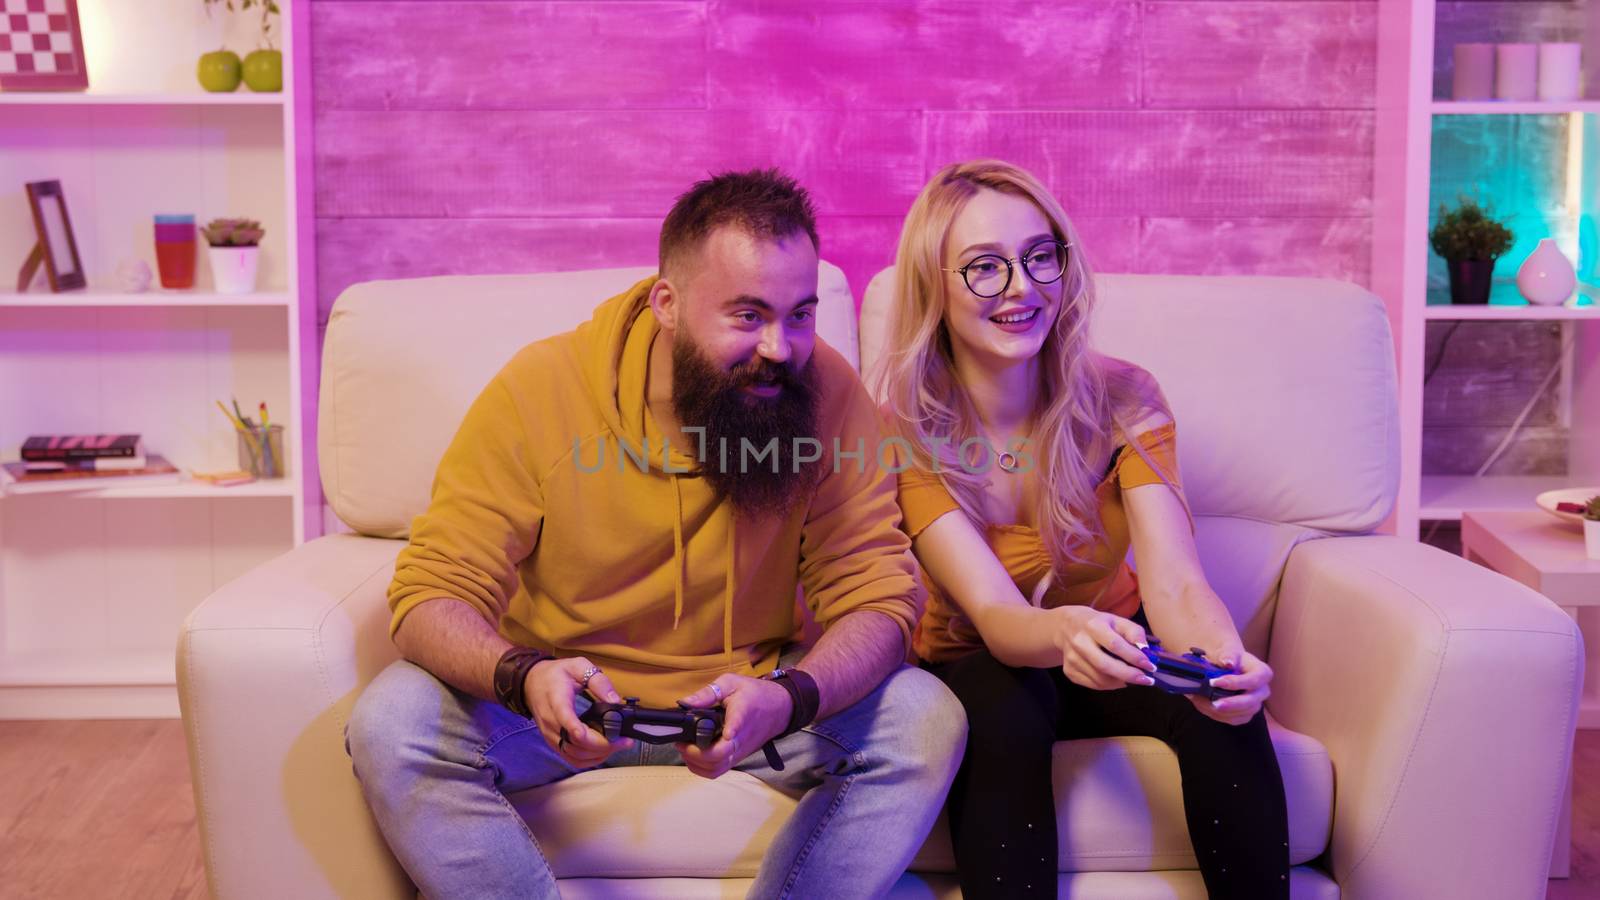 Female gamer playing online video games with her boyfriend sitting on sofa using wireless controllers.